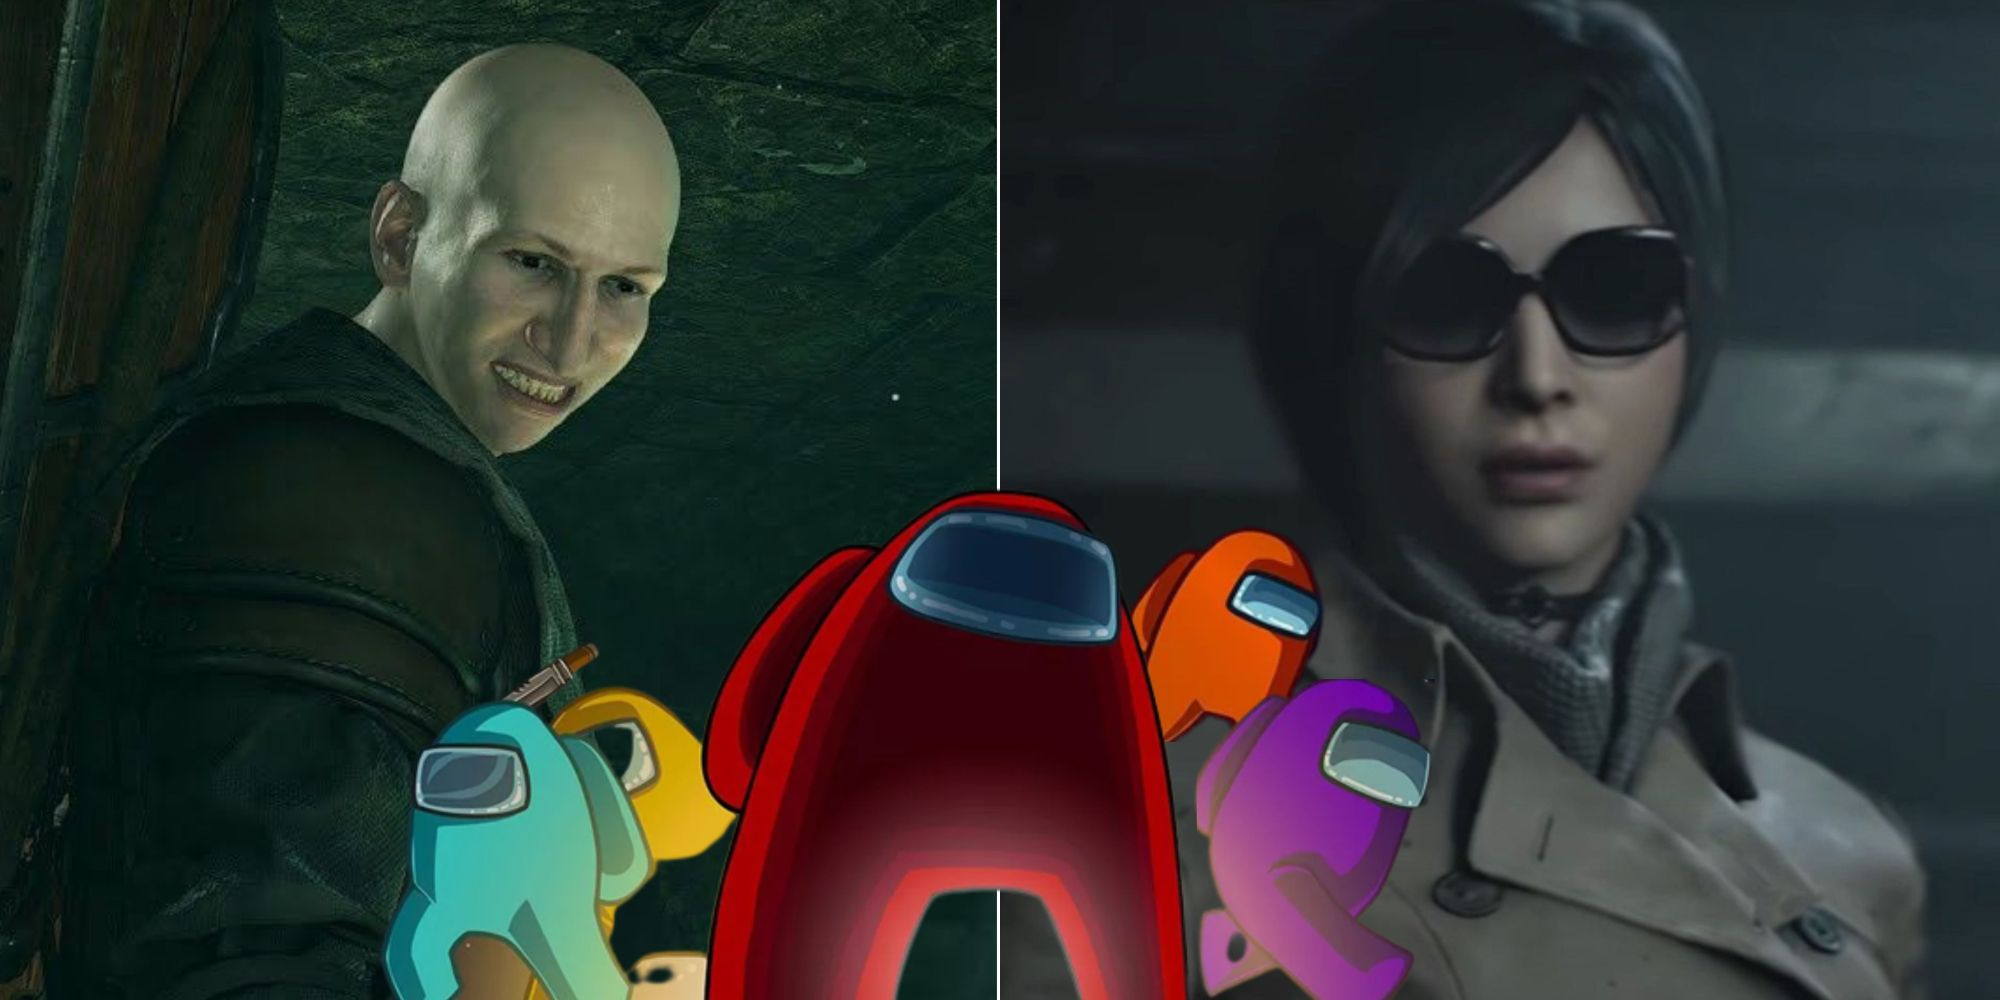 Patches from Demon Souls looking down (left), Among Us Characters (Center), and Ada Wong from Resident Evil wearing a sunglasses